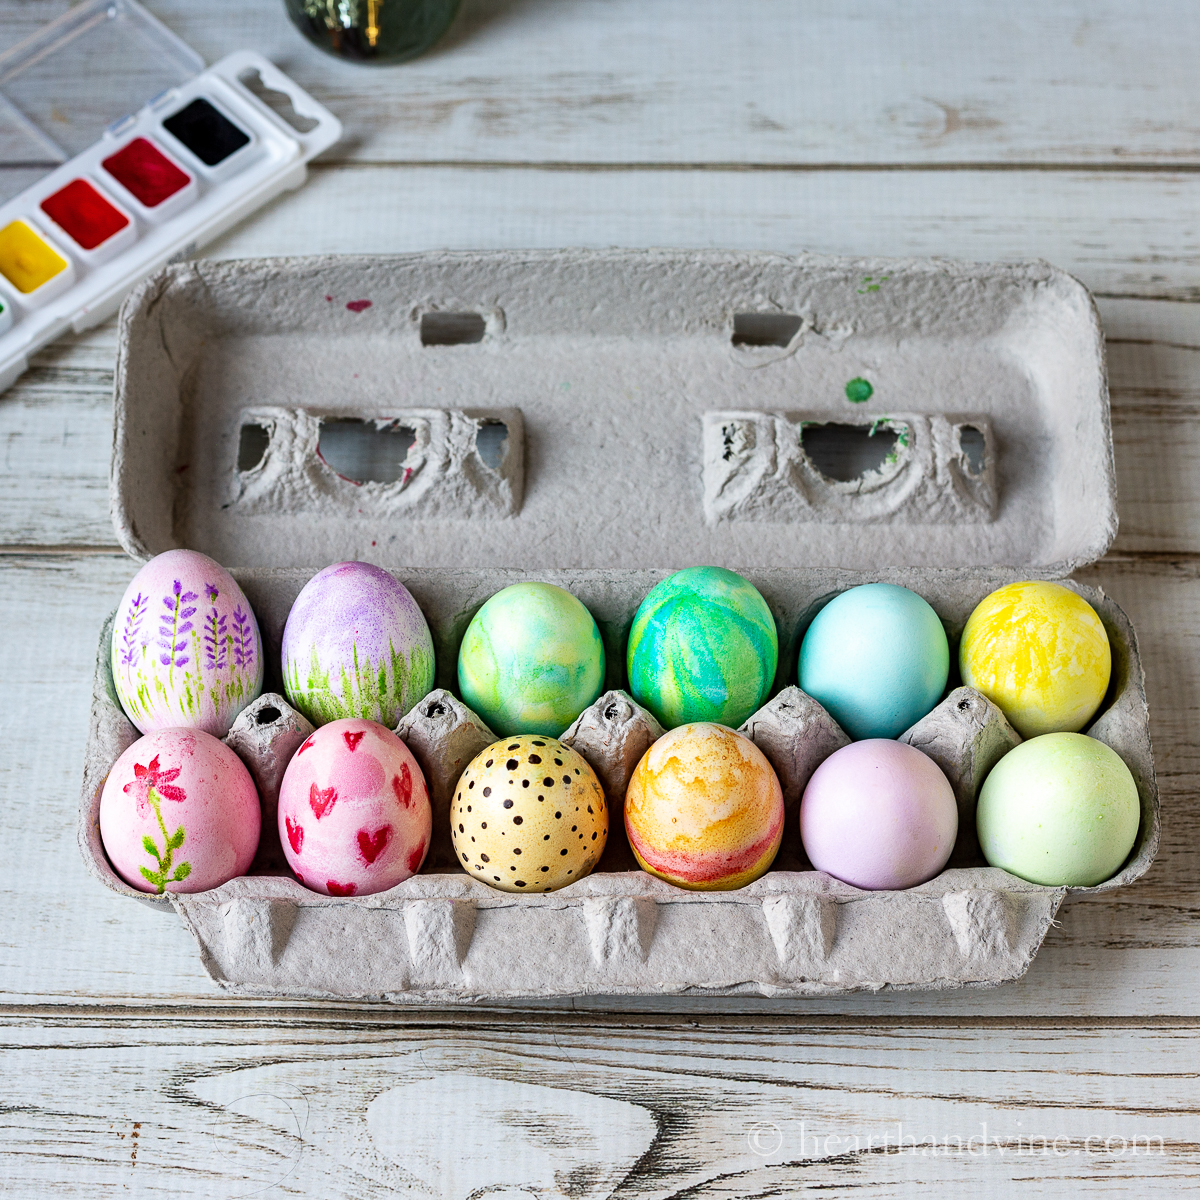 easter egg coloring techniques